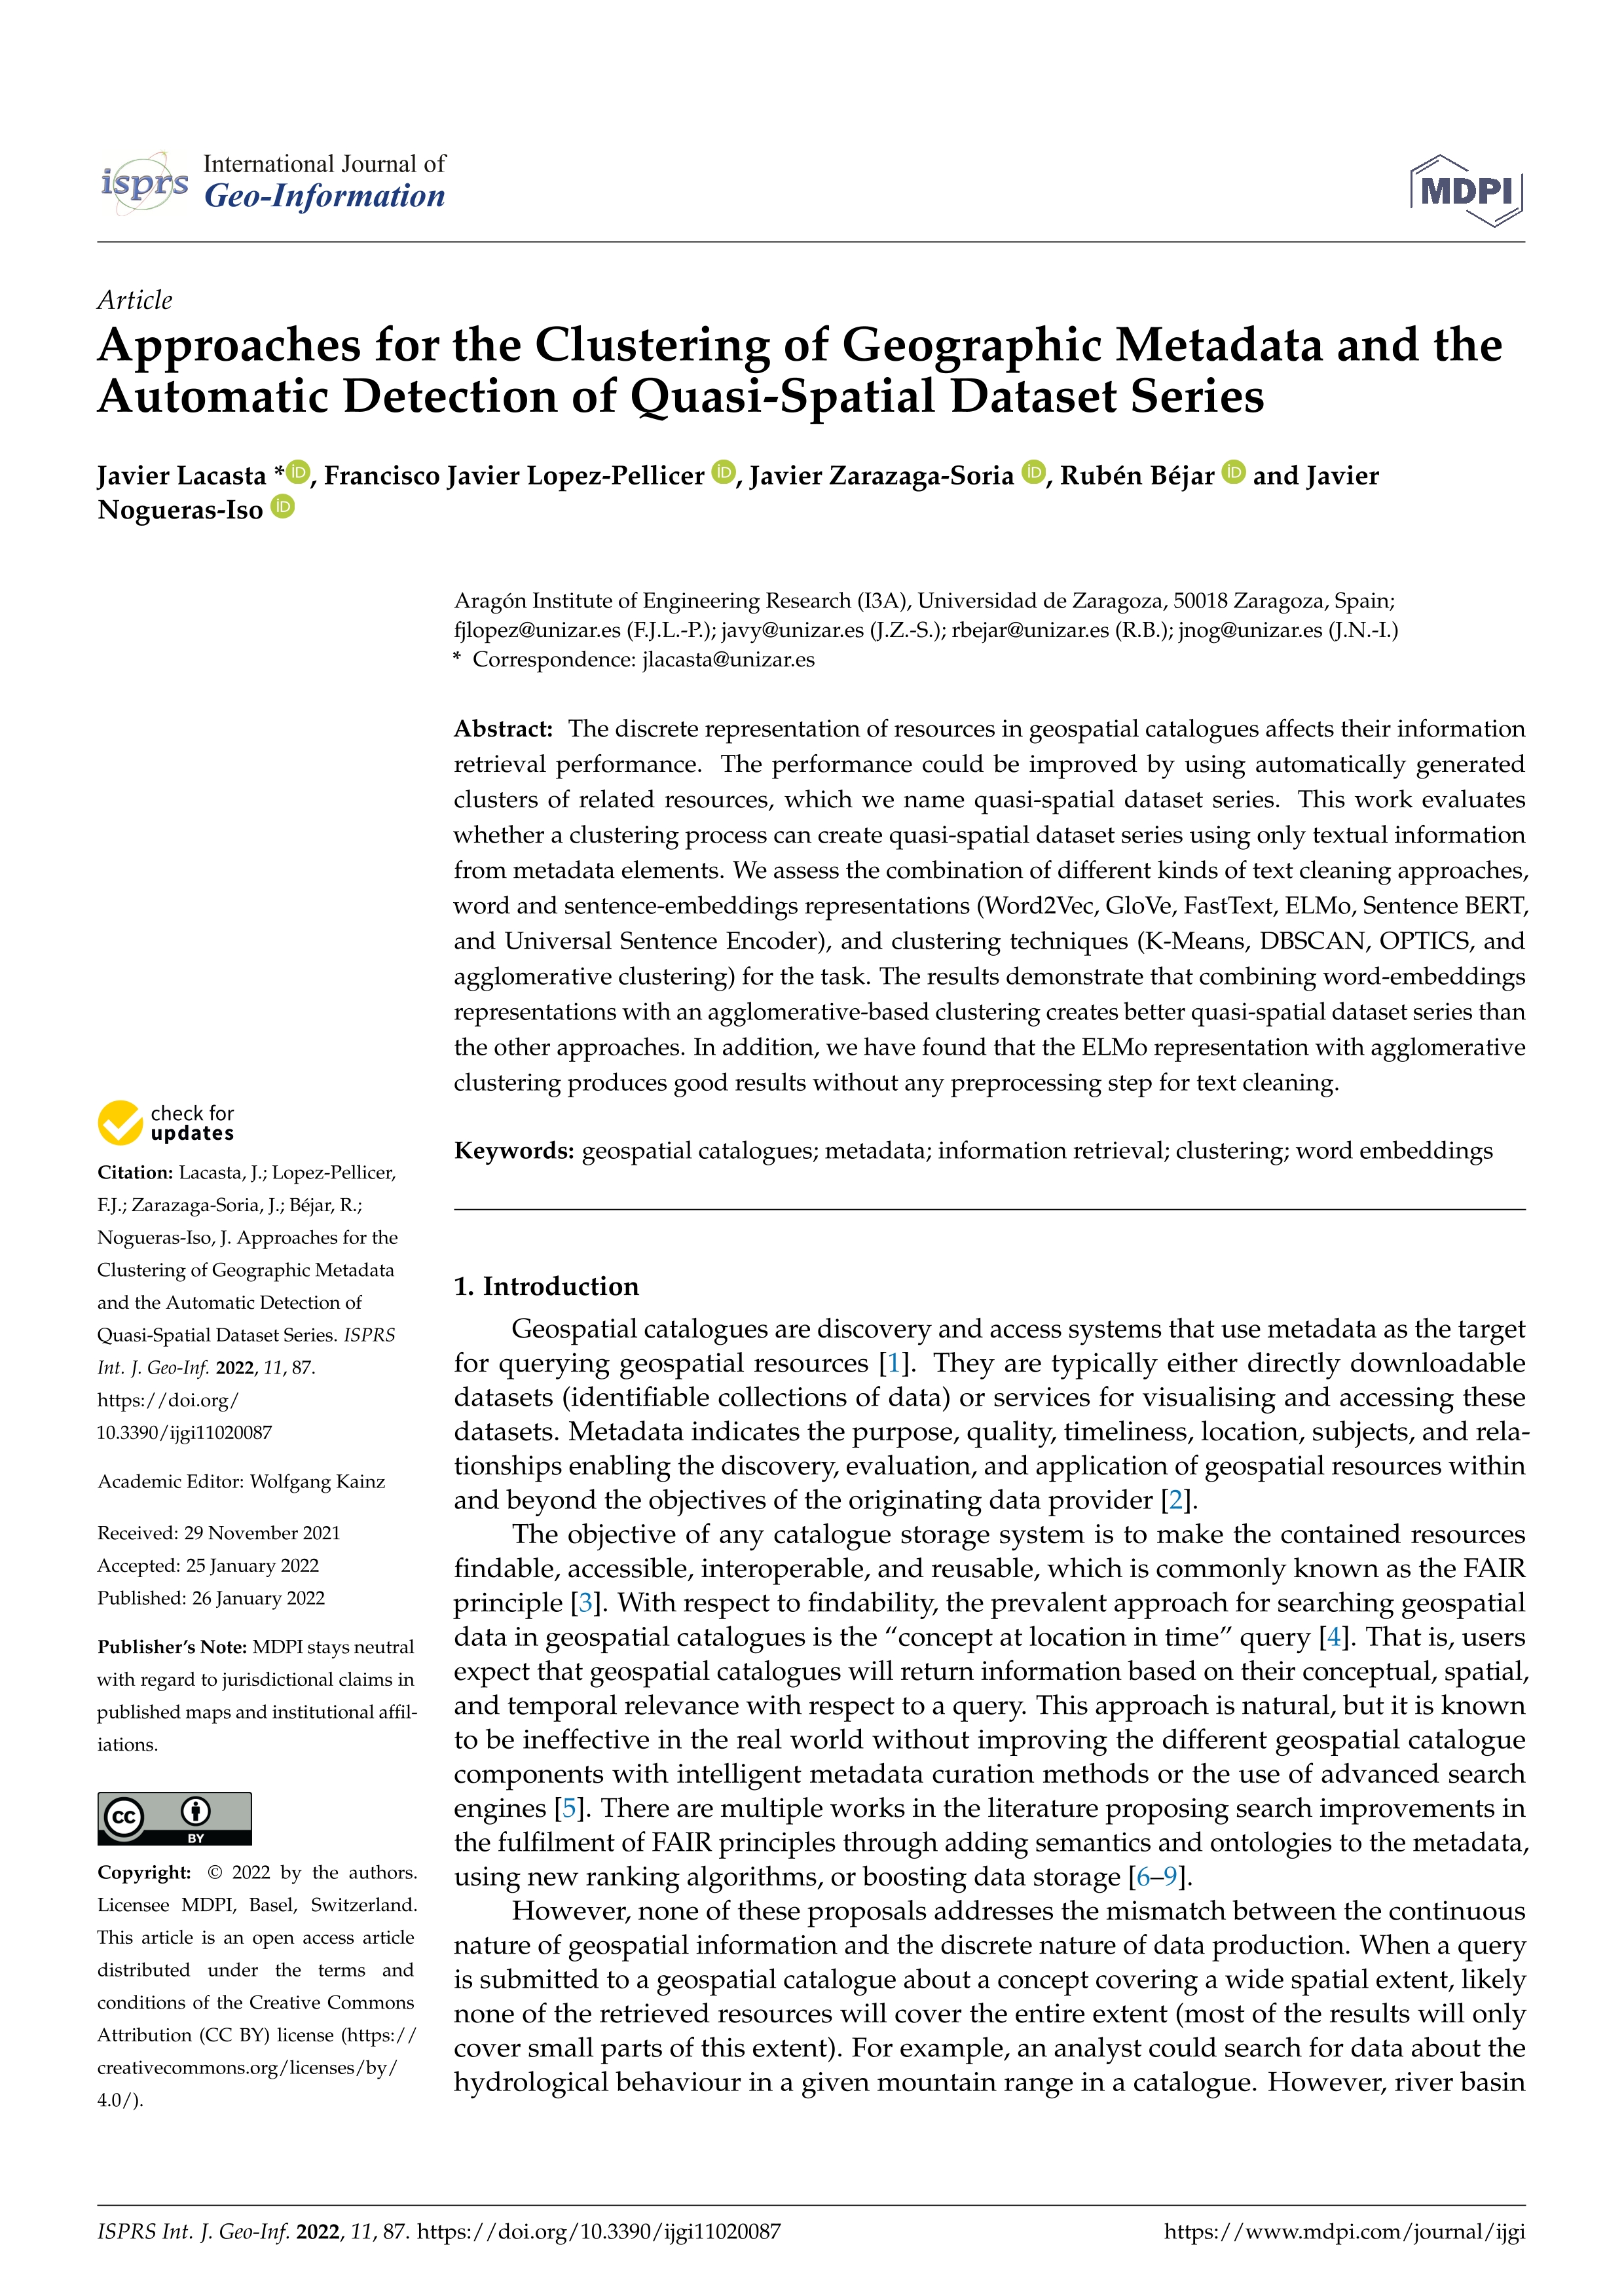 Approaches for the clustering of geographic metadata and the automatic detection of quasi-spatial dataset series